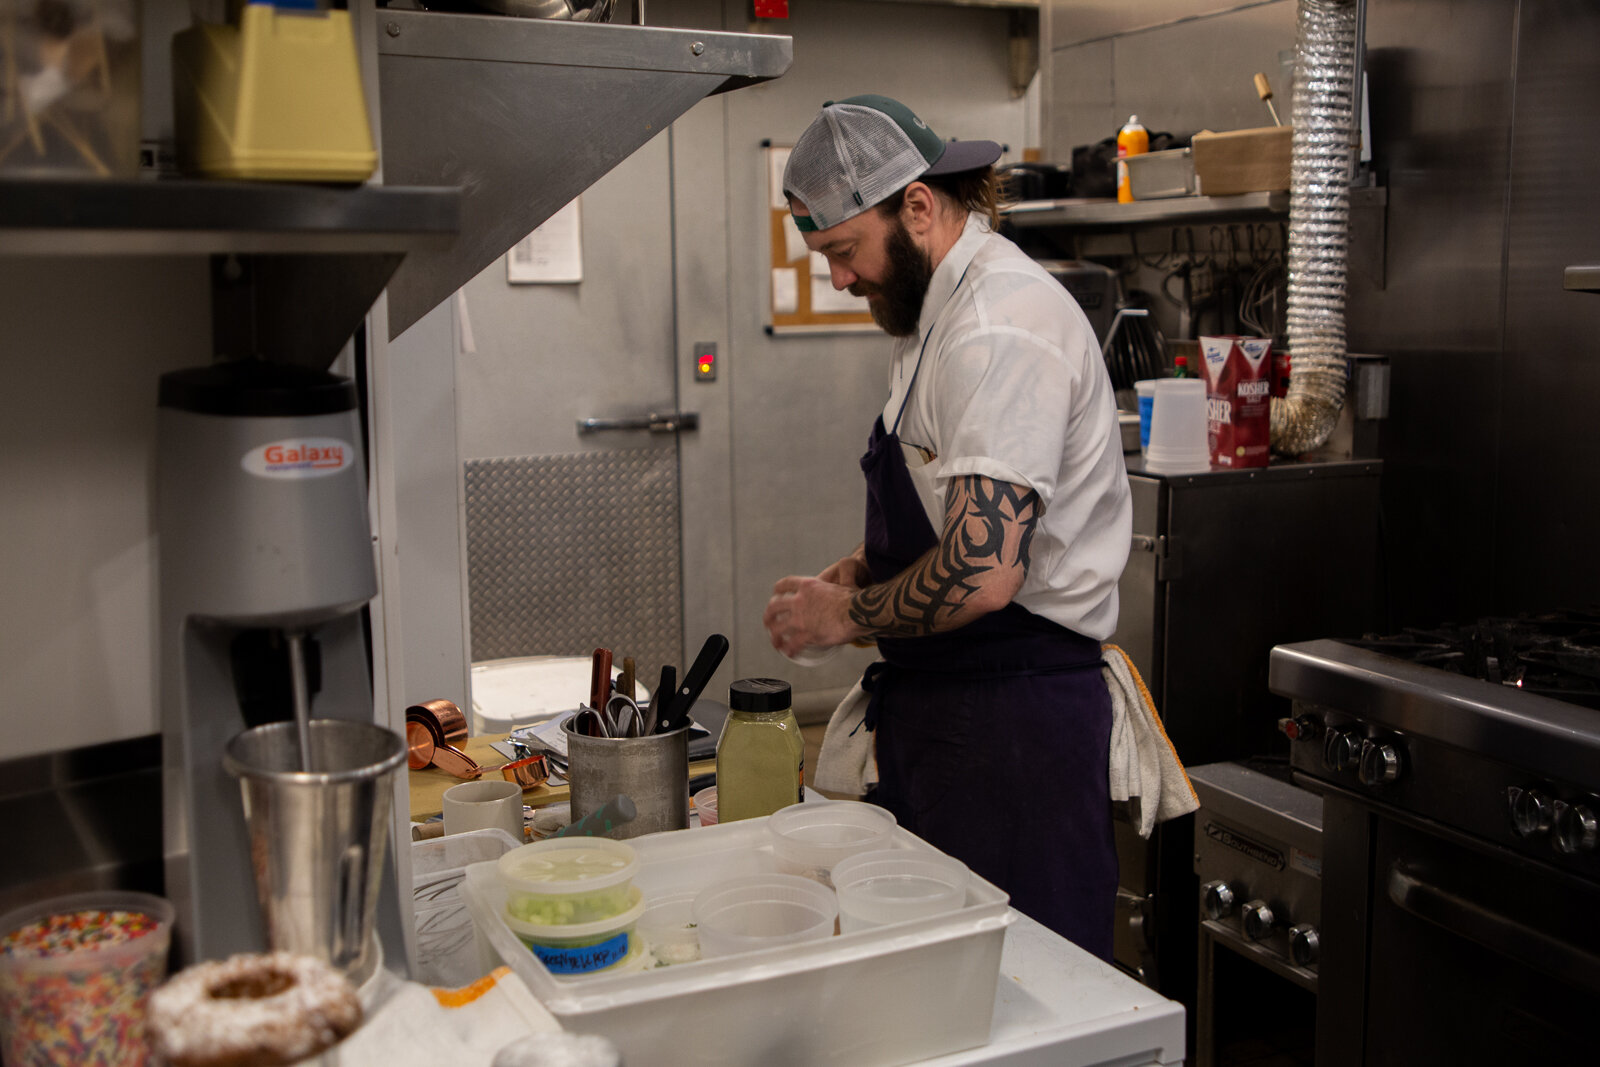  Chef Kyle Bailey preparing the kitchen of The Salt Line for an evening of diners Thursday, Nov. 29, 2018 in Washington D. C. The Salt Line is a part of the nonprofit Dock to Dish that matches local, sustainable fishermen with restaurants in efforts 